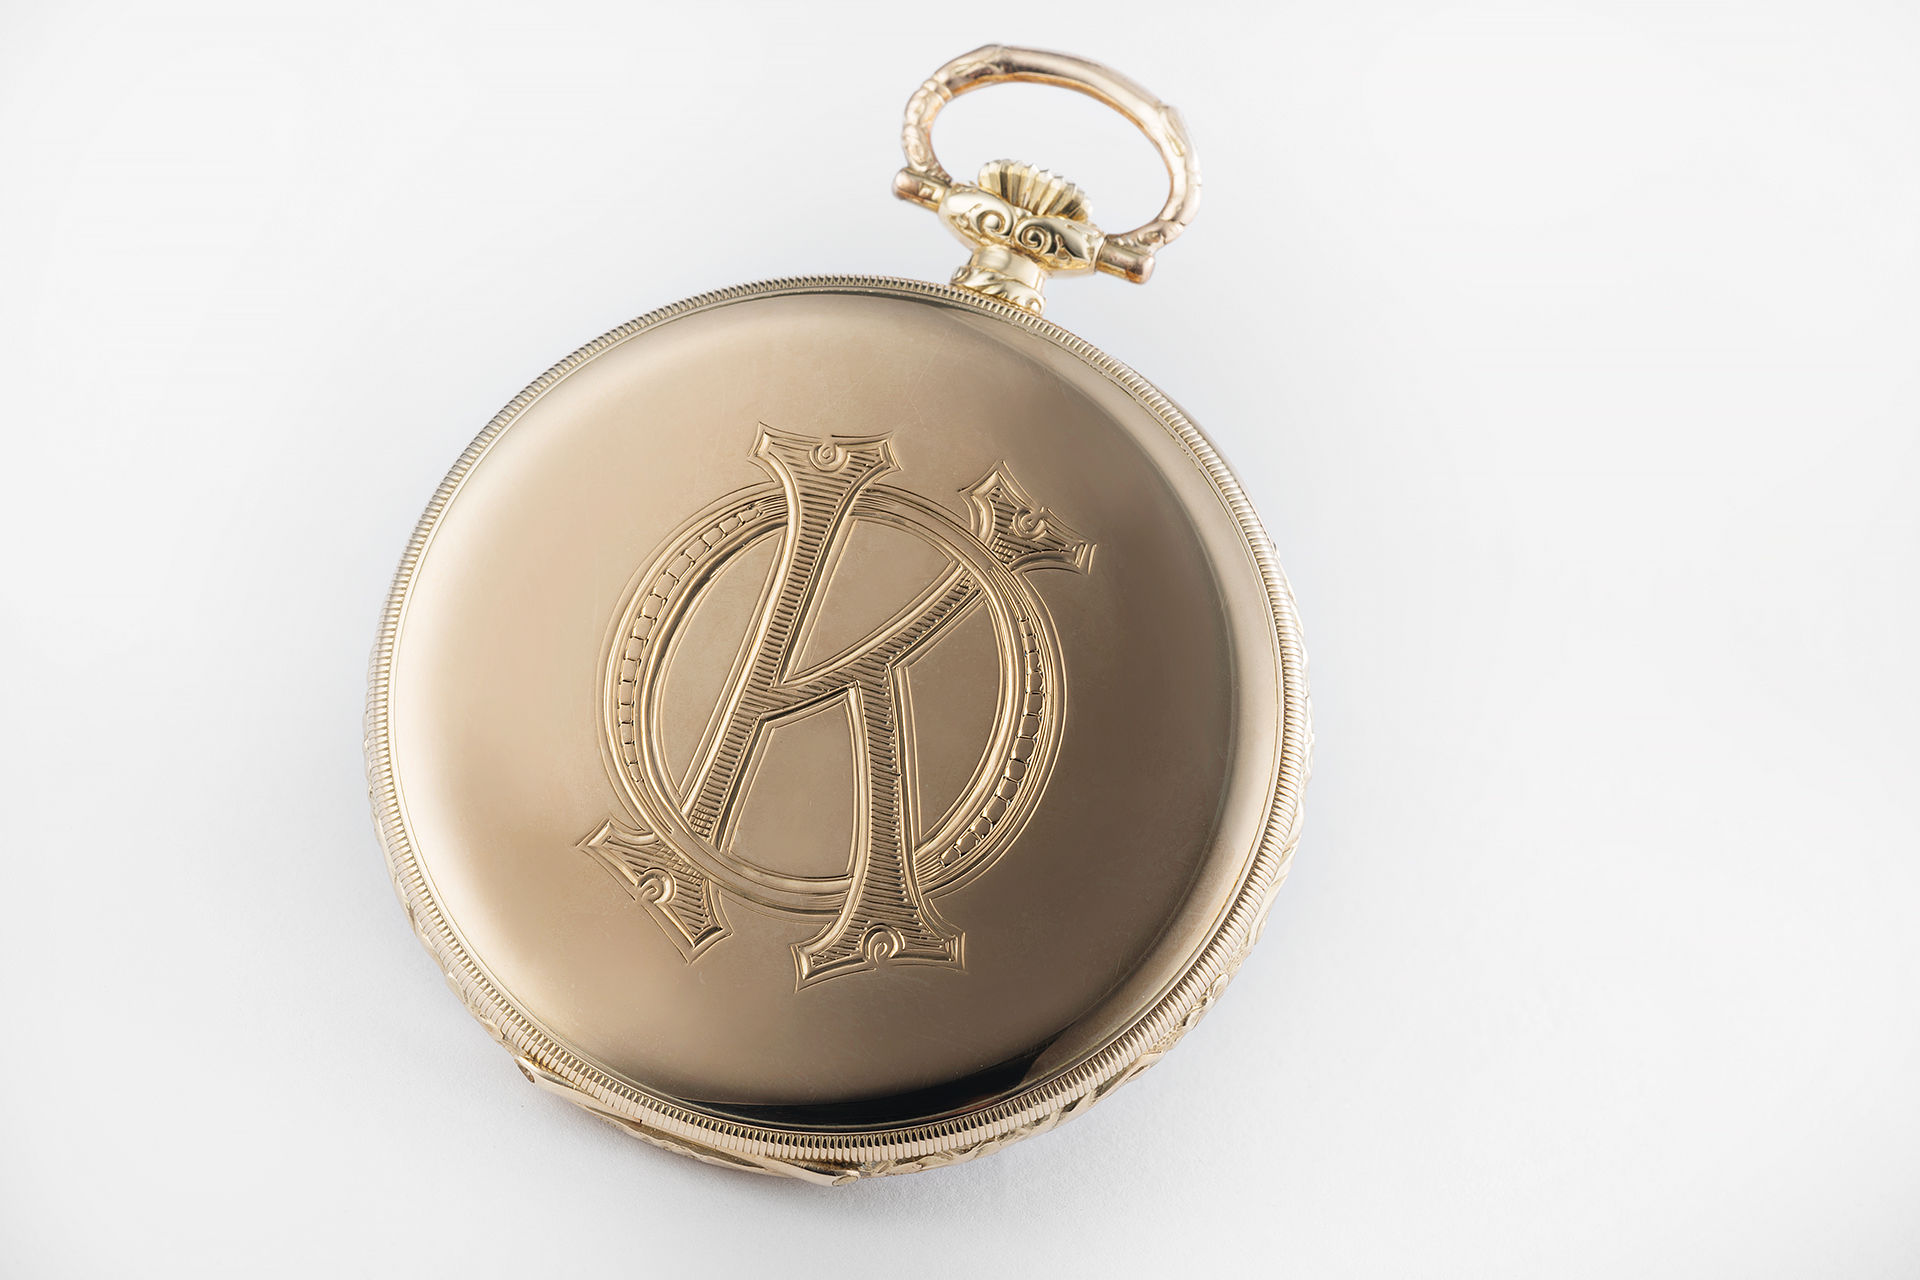 ref OK1042 | 14ct 'Frosted Dial' | Omega Pocket Watch